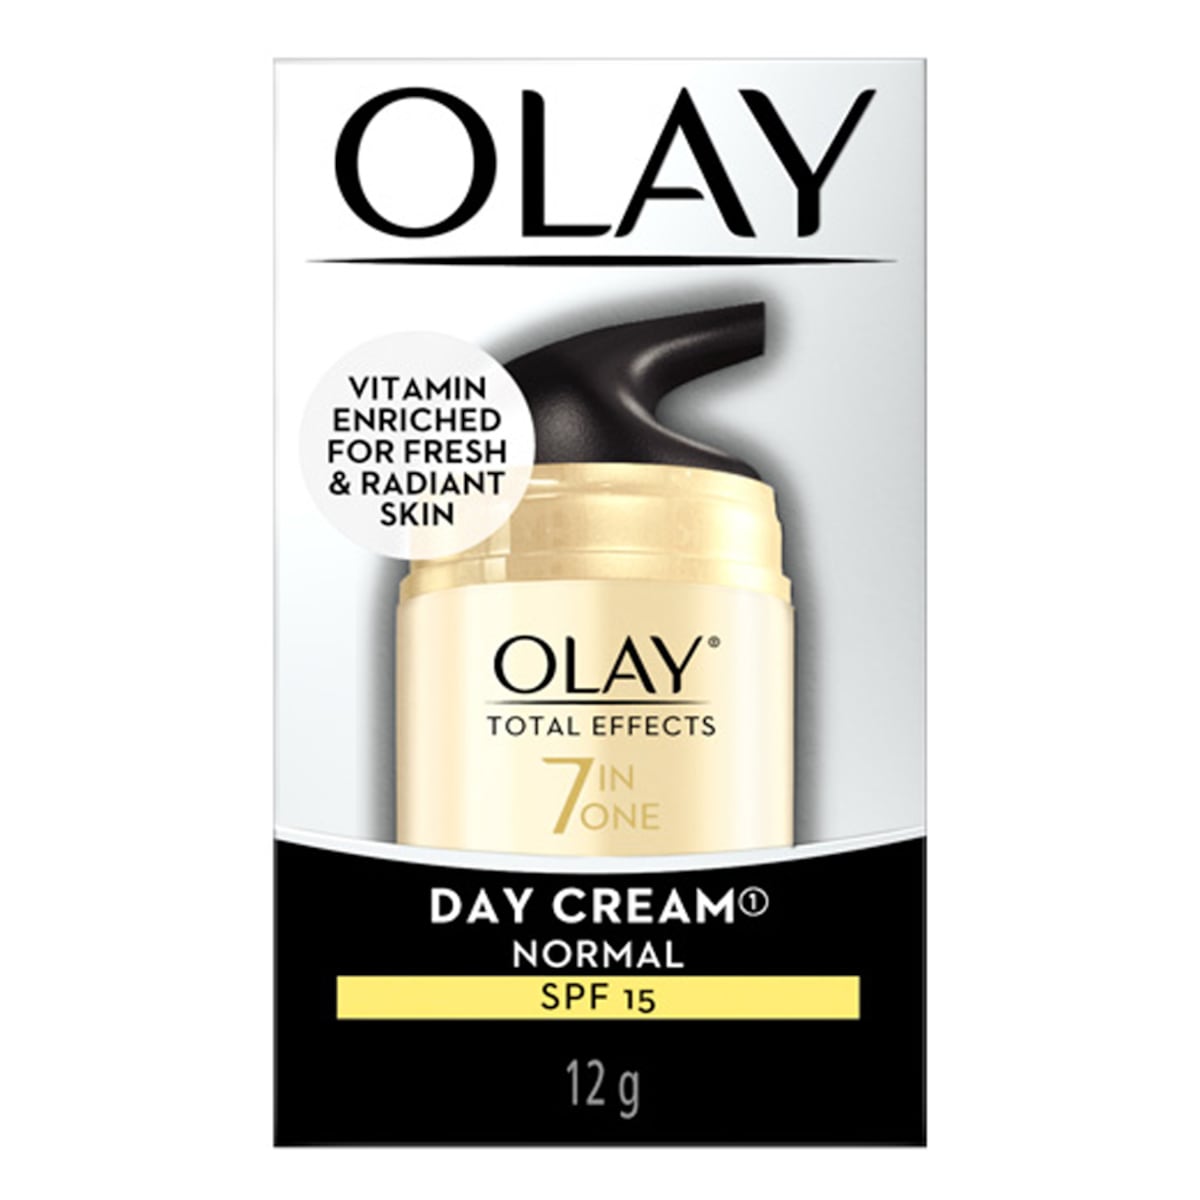 Olay Total Effects Day Cream Normal SPF15 12g